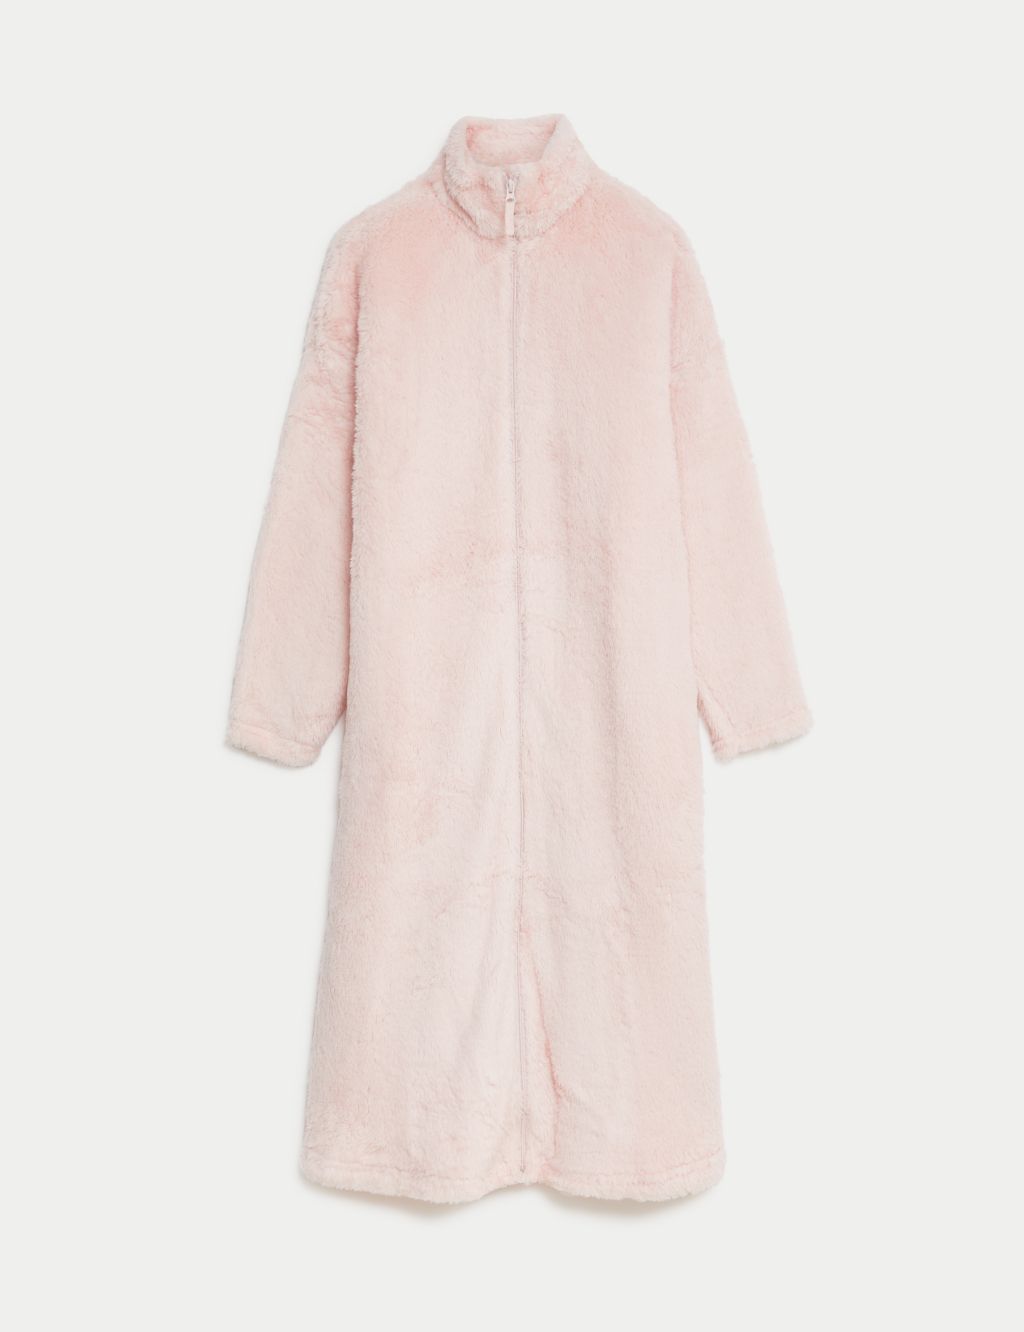 Long Dressing Gown image 2